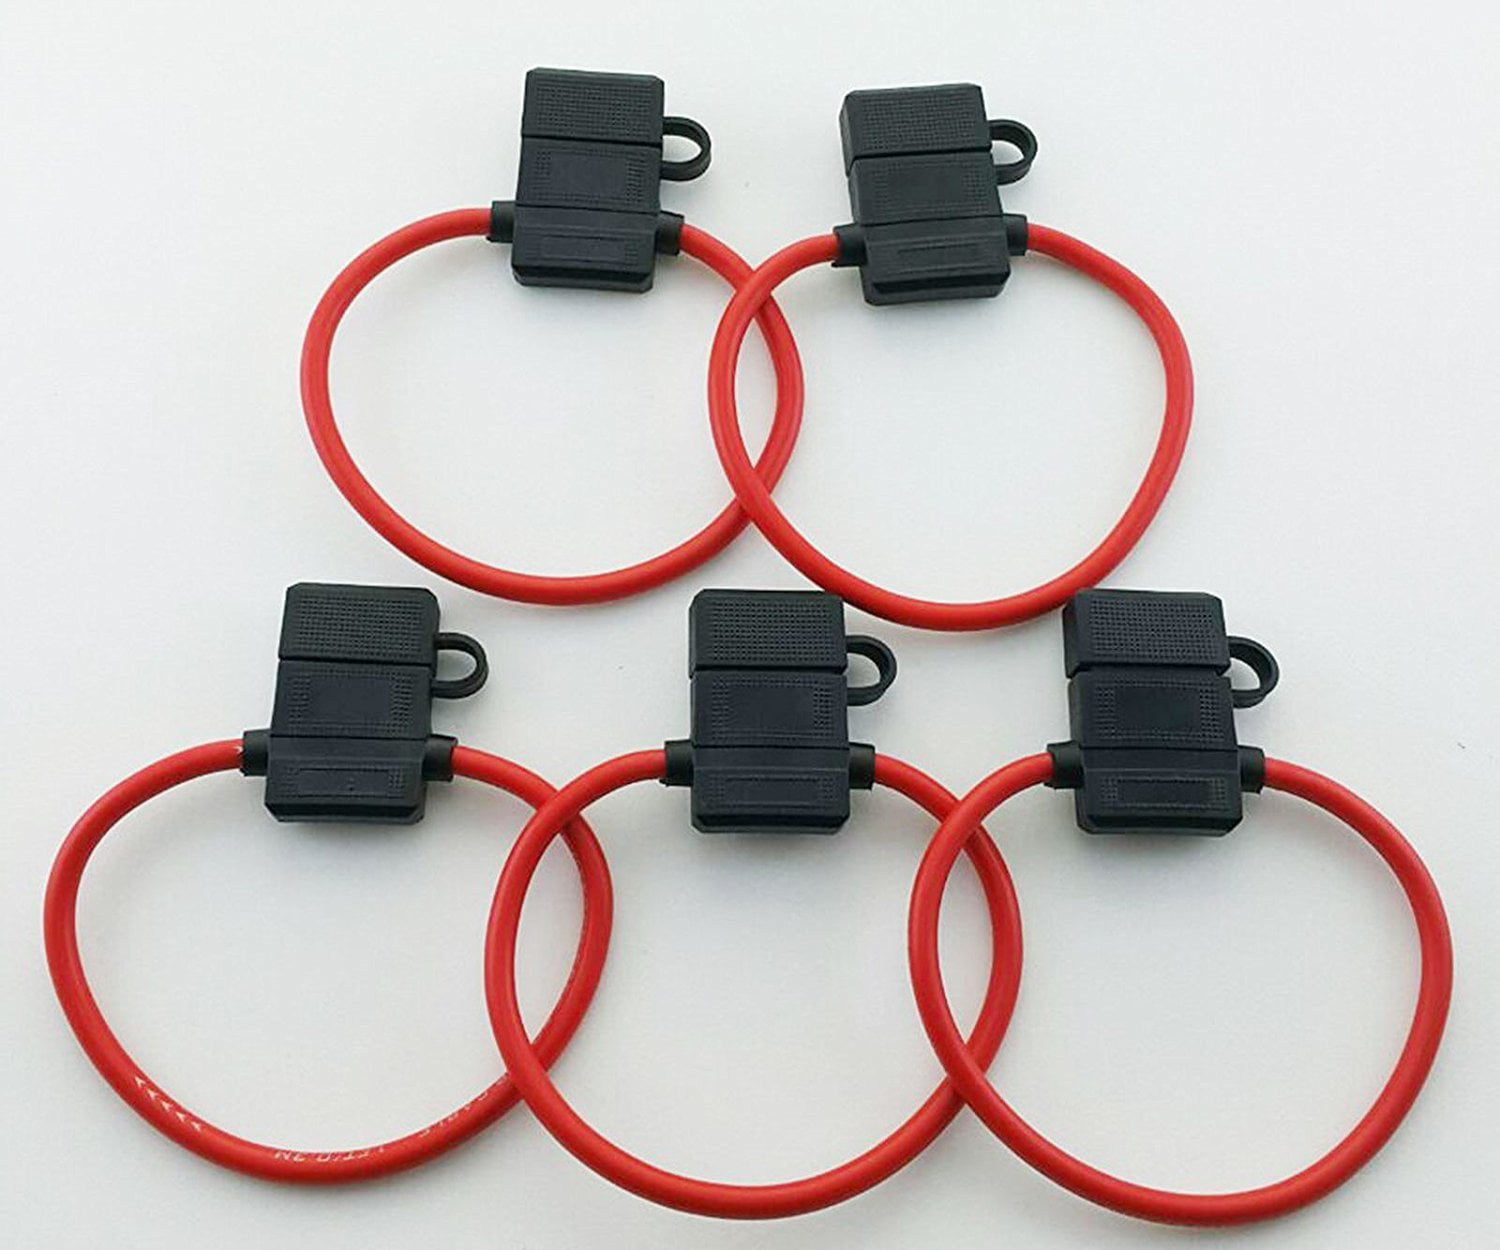 5 PACK 16 GAUGE ATC FUSE HOLDER IN-LINE  WIRE COPPER 12 VOLT WITH COVER USA 